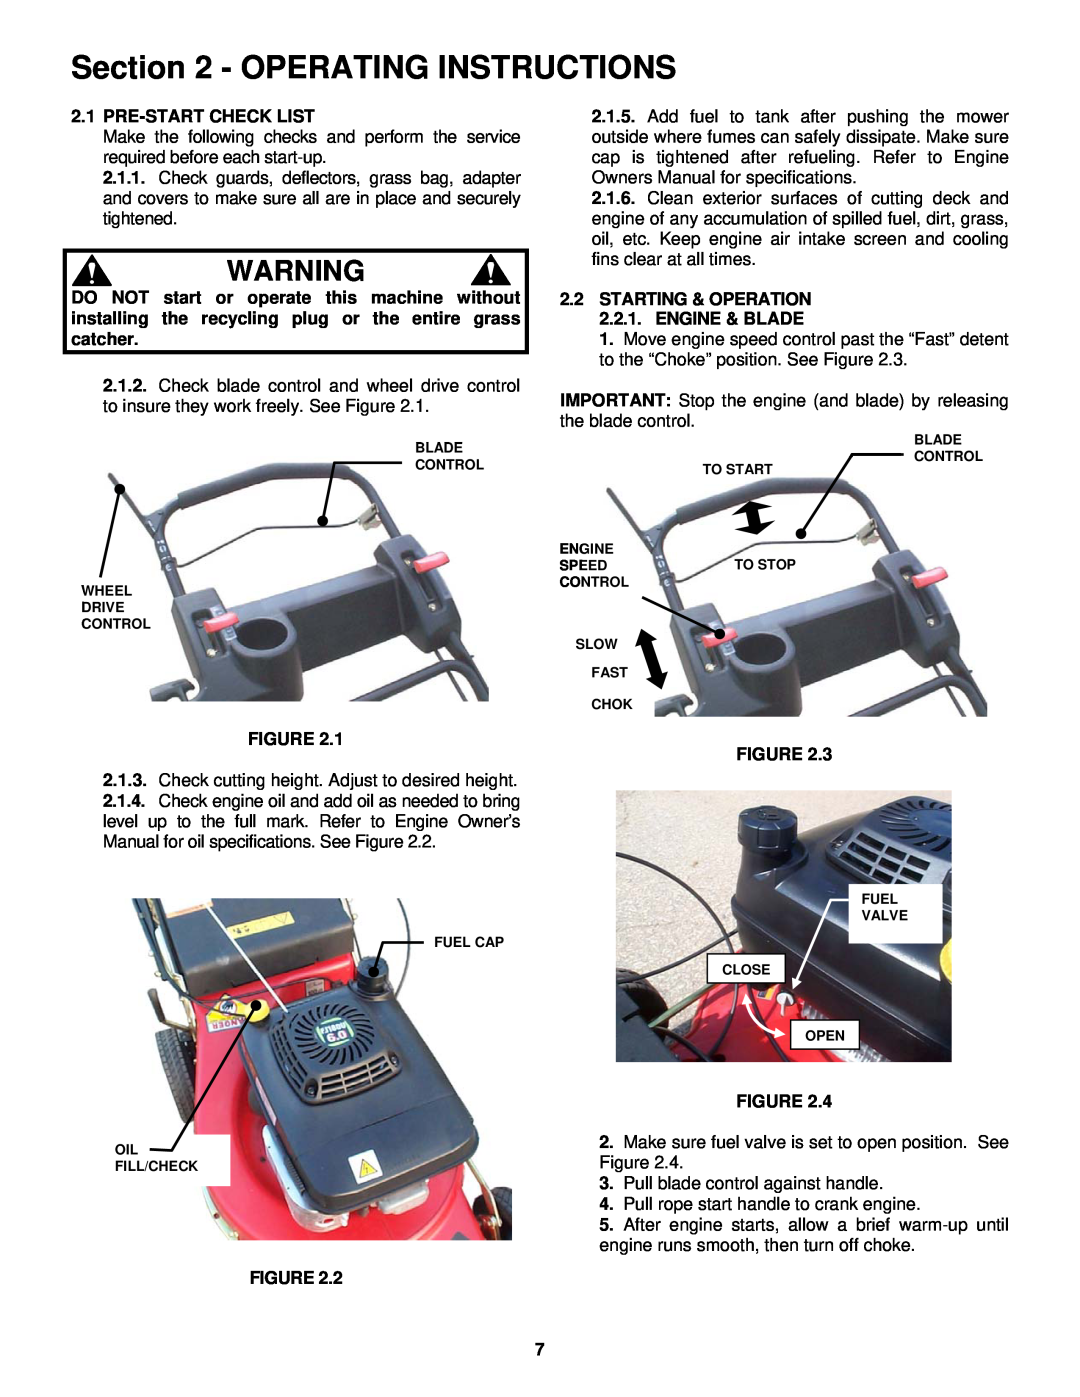 Snapper ECLP21602KWV Operating Instructions, Pre-Start Check List, STARTING & OPERATION 2.2.1. ENGINE & BLADE 